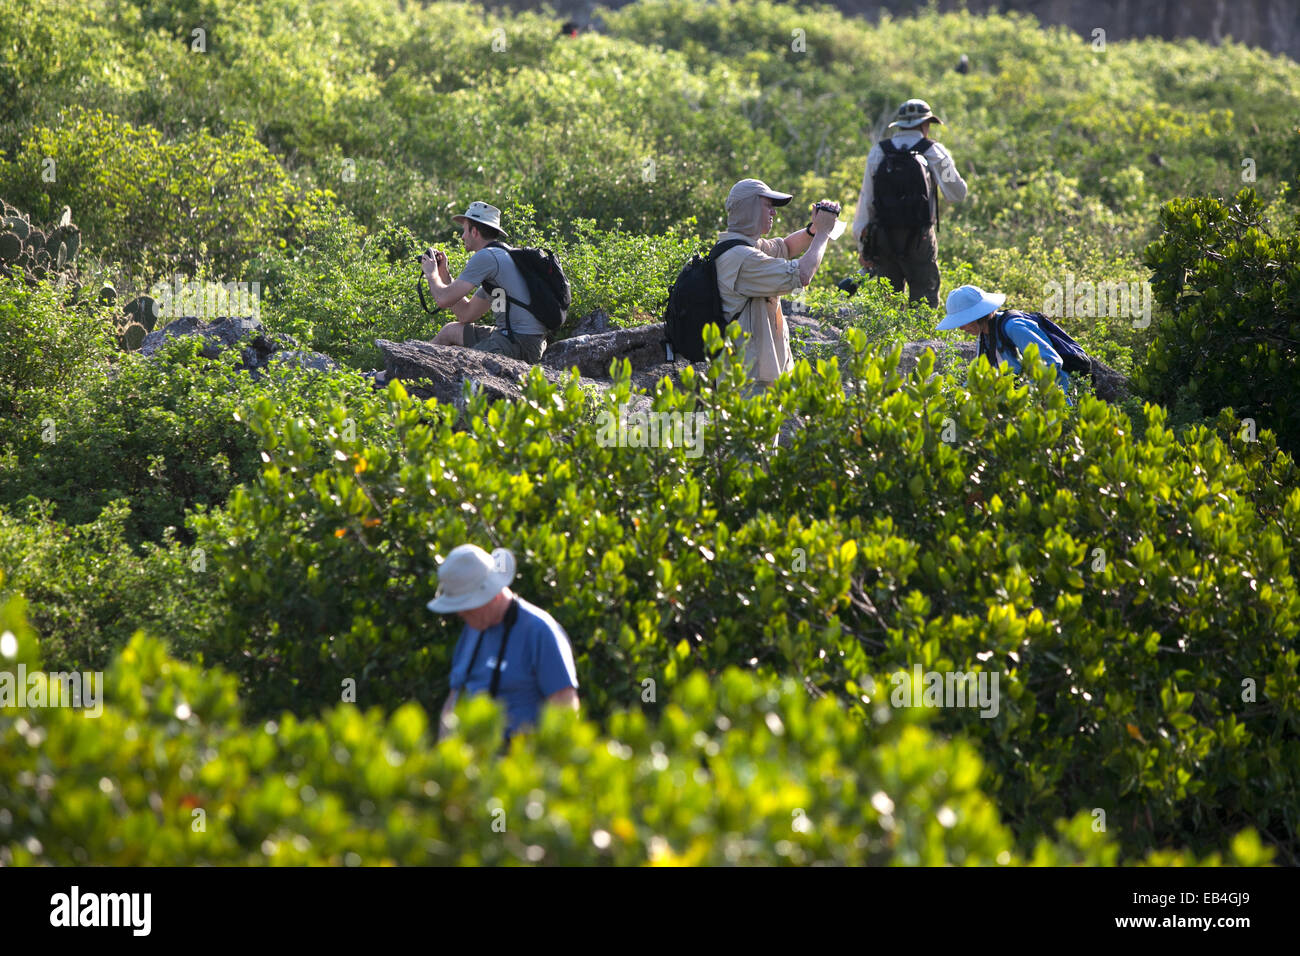 Tourists enjoying the native flora and fauna as they wander a Galapagos Islands landscape. Stock Photo